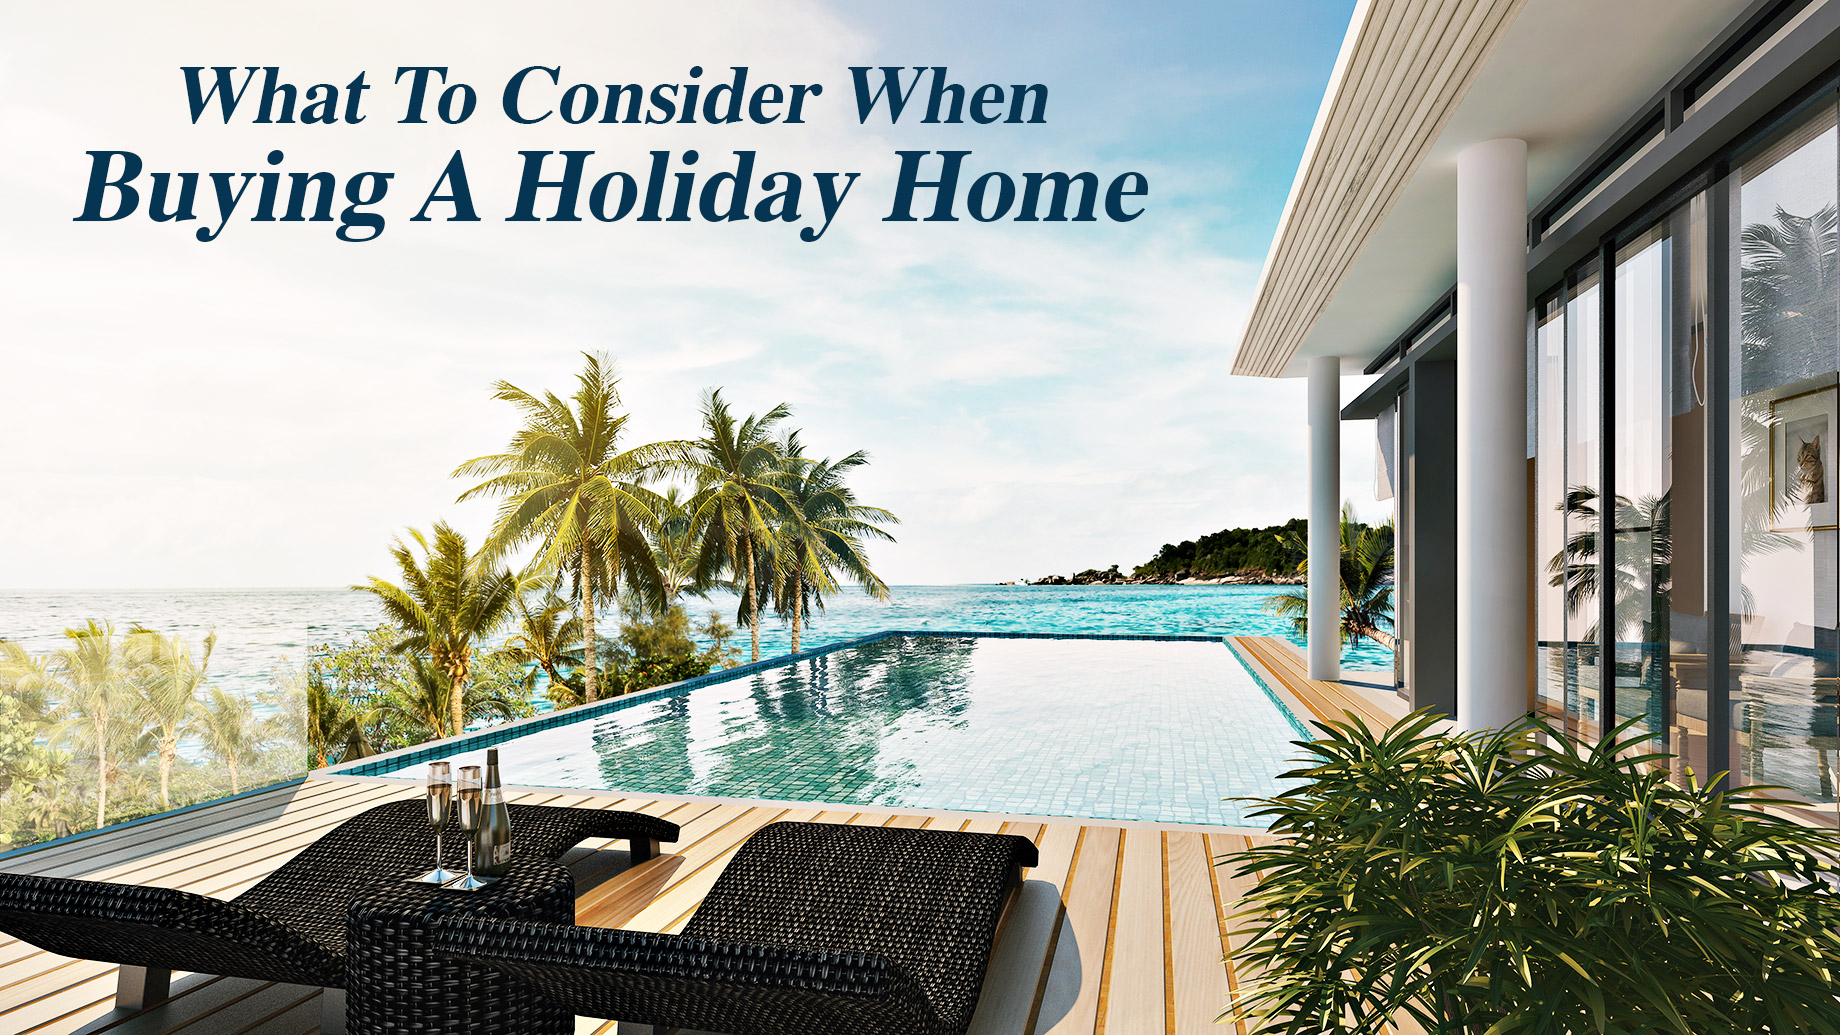 What To Consider When Buying A Holiday Home